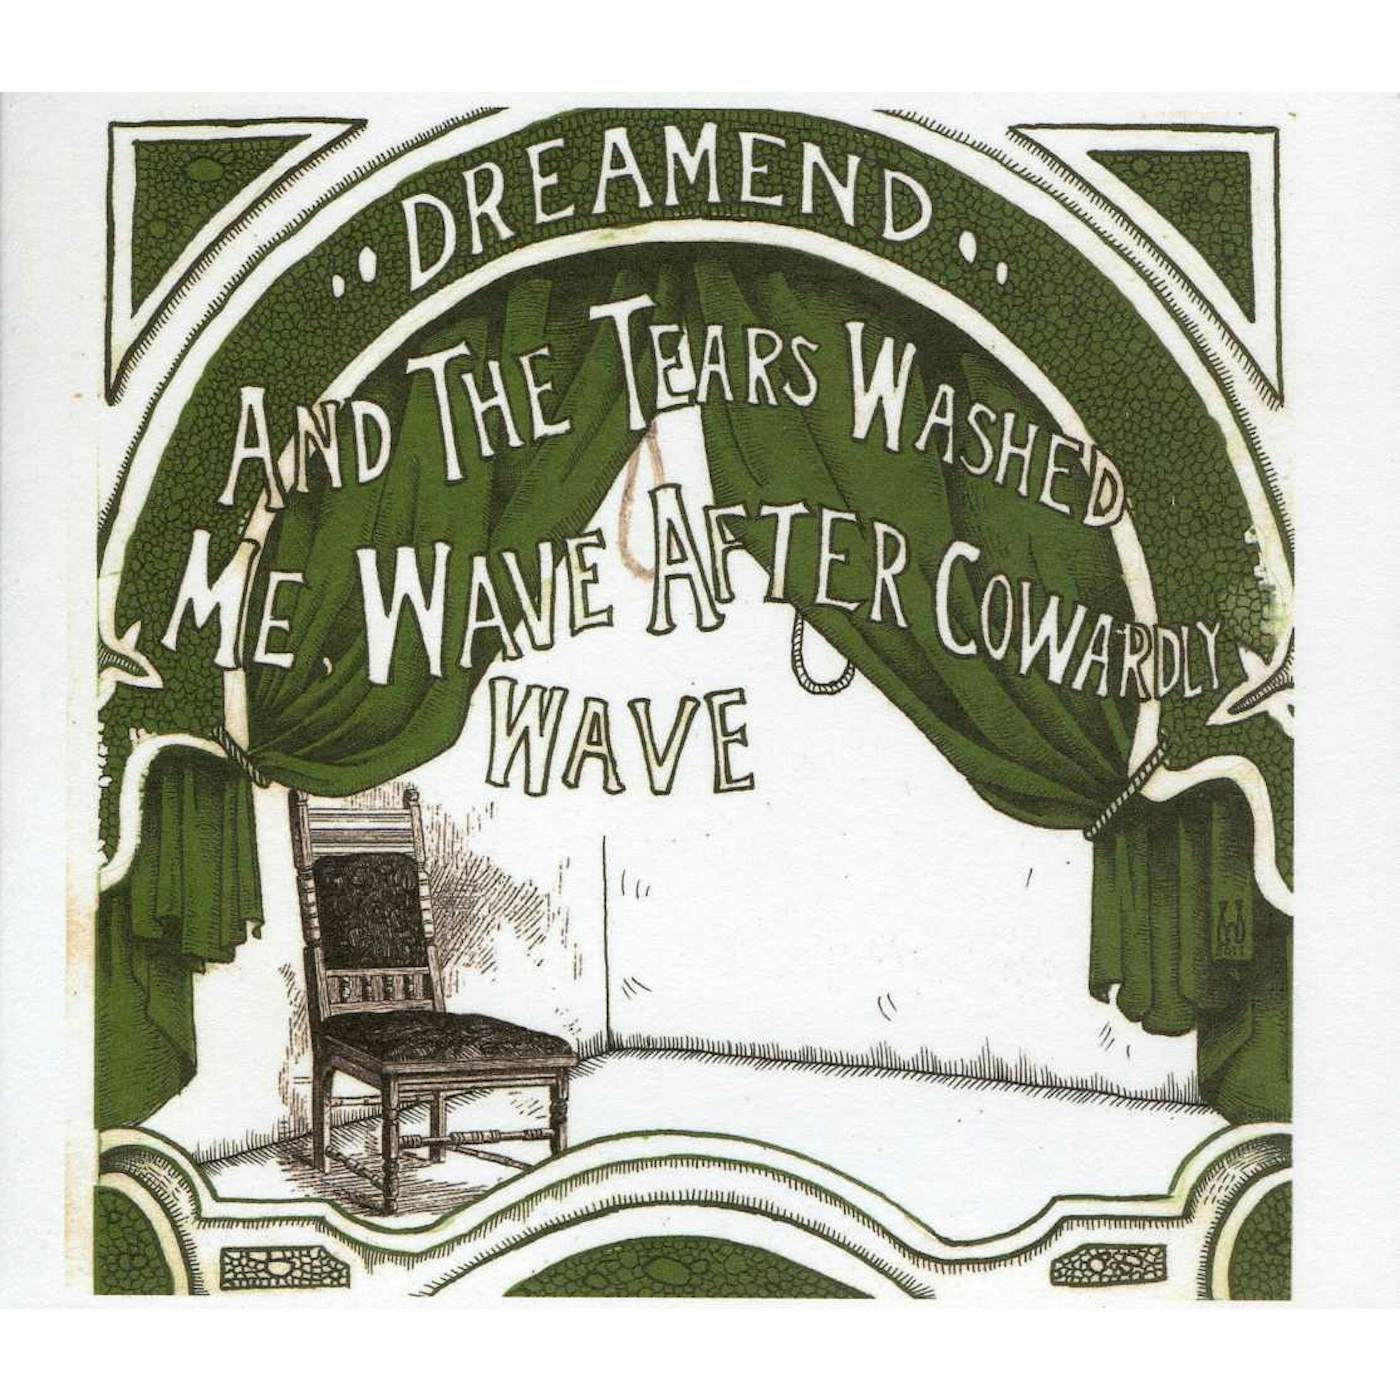 Dreamend THE TEARS WASHED ME WAVE AFTER COWARDLY WAVE CD